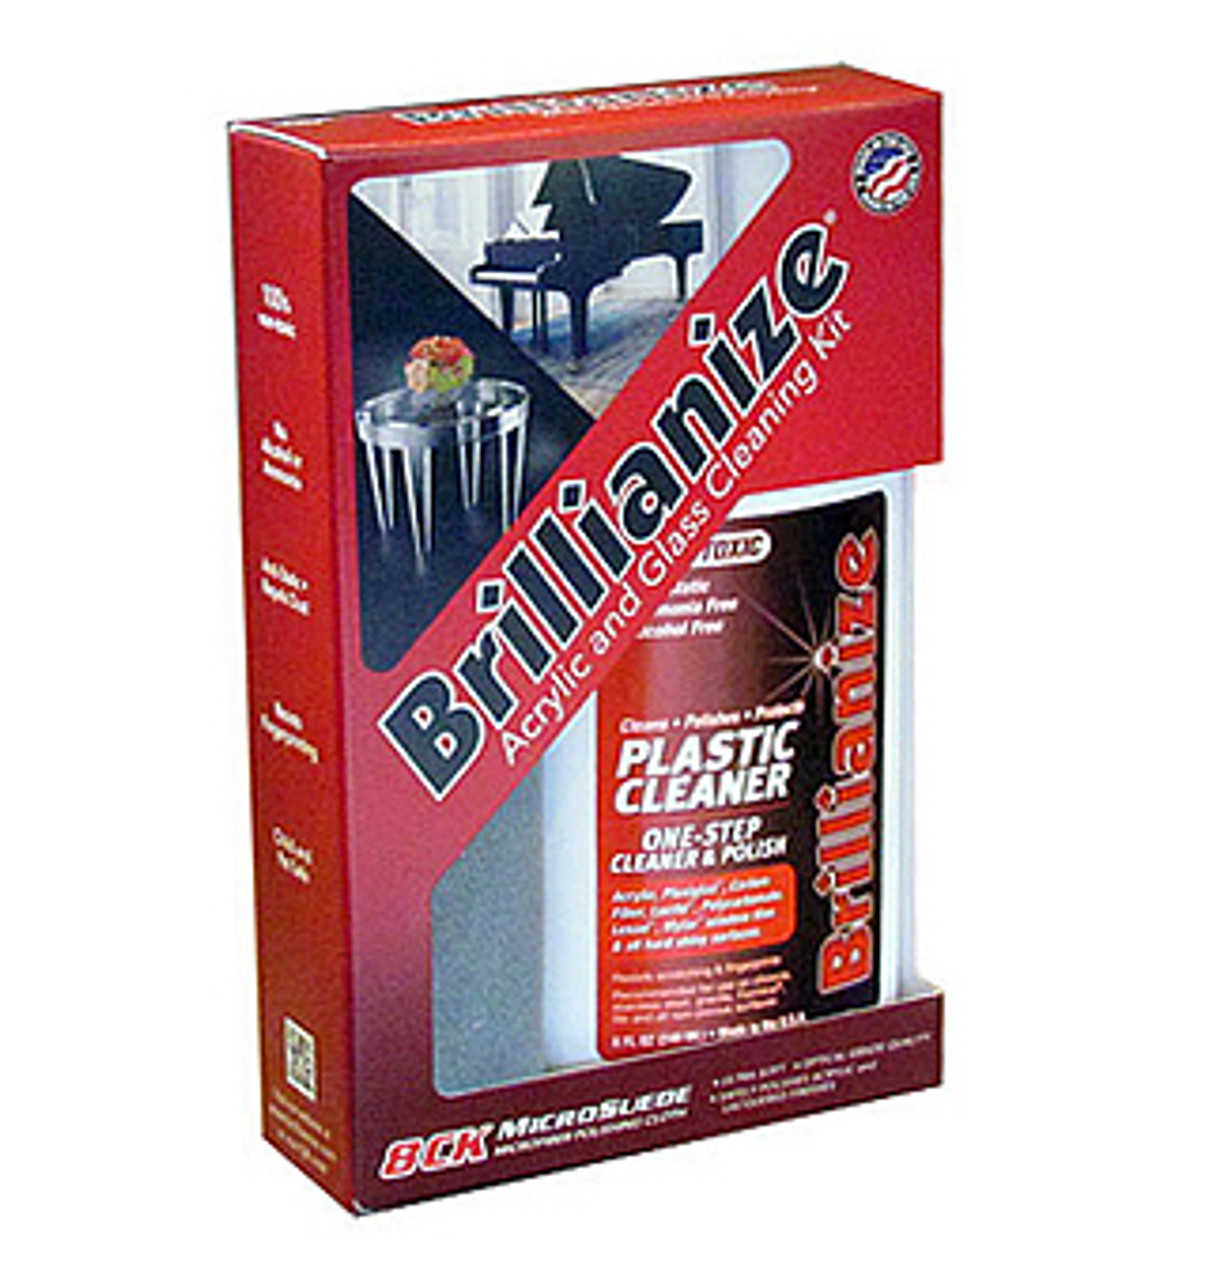 Plastic Cleaner Kit by Brillianize for polycarbonate